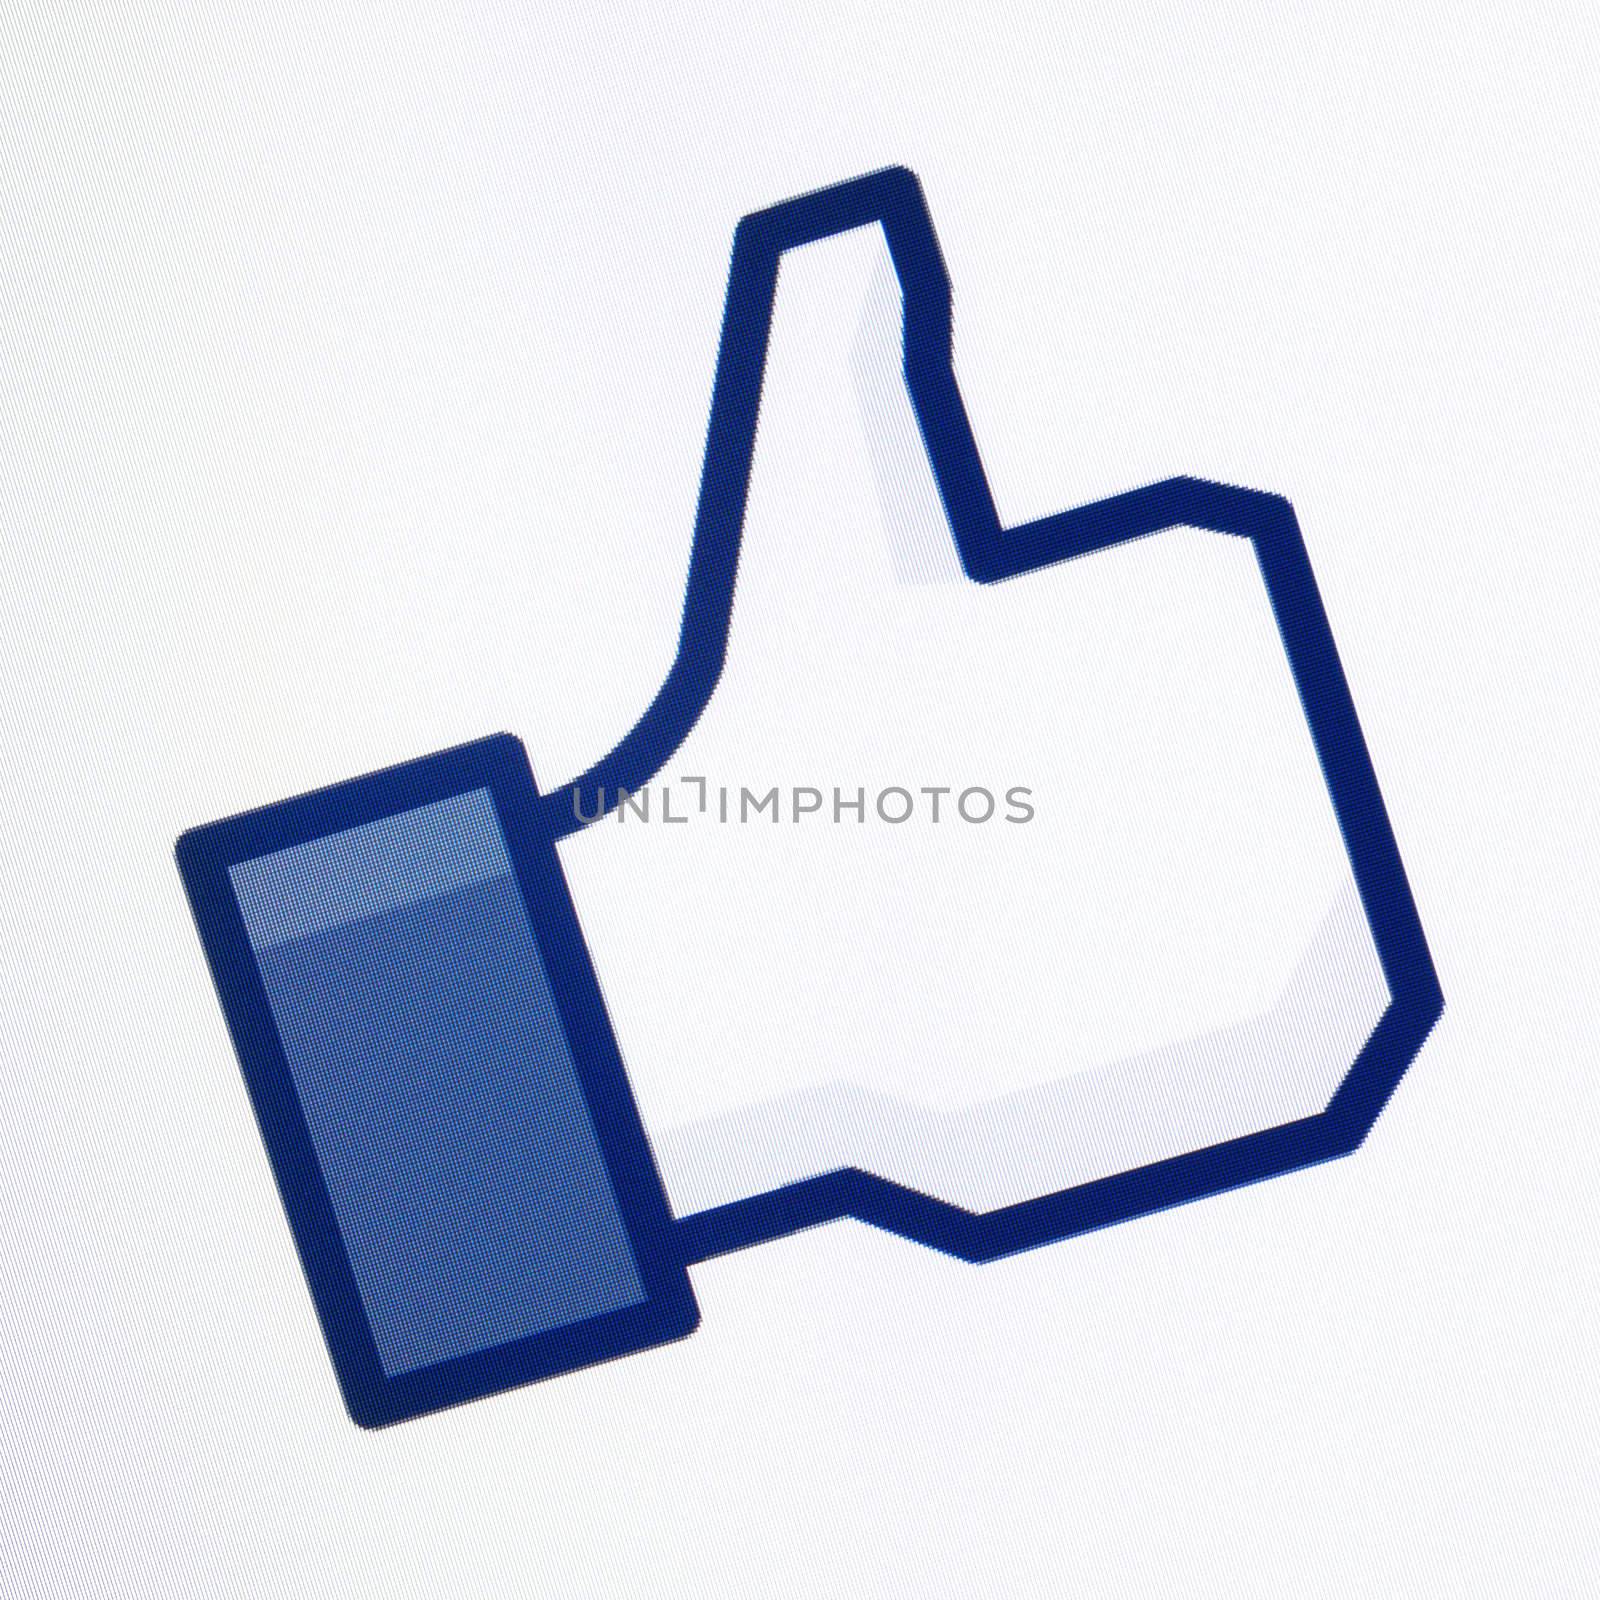 Thumbs Up Facebook Symbol by bloomua